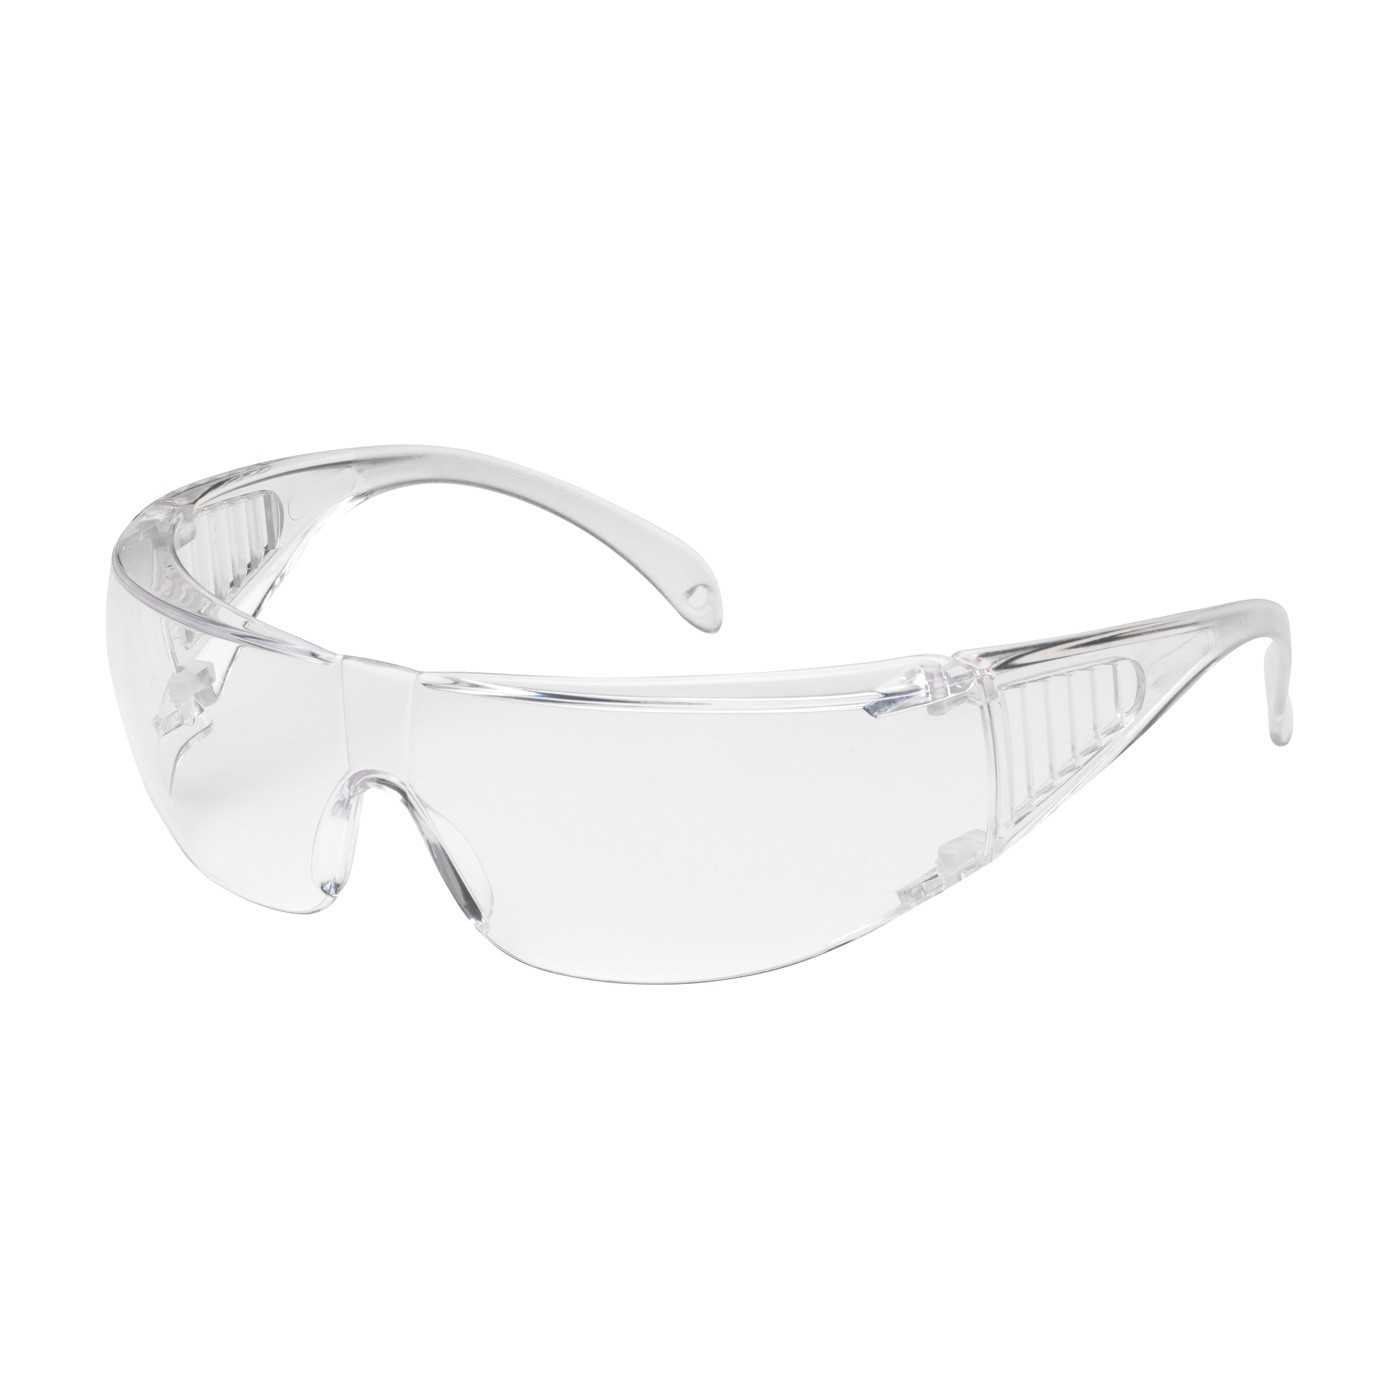 Ranger™ OTG Rimless Safety Glasses with Clear Temple, Clear Lens and Anti-Scratch Coating  (#250-37-0900)